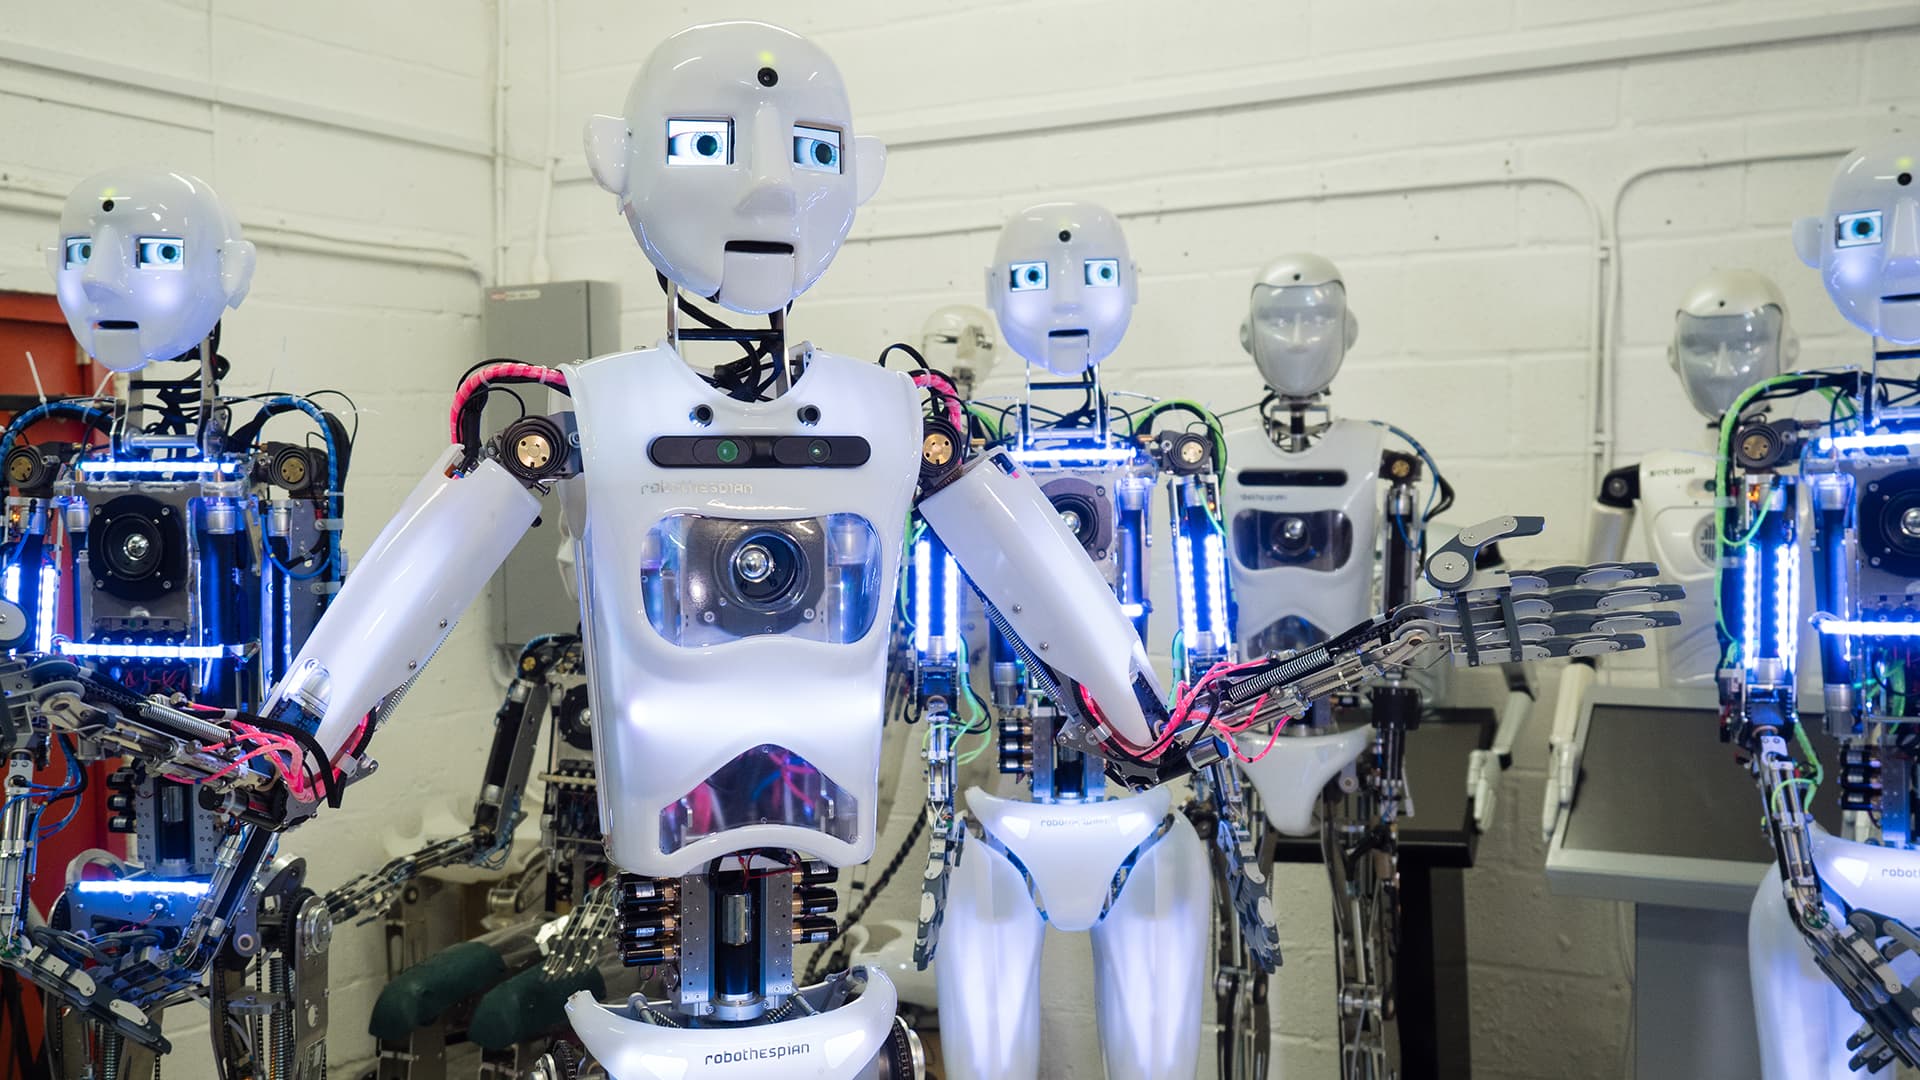 A singing robot factory can't find enough human workers